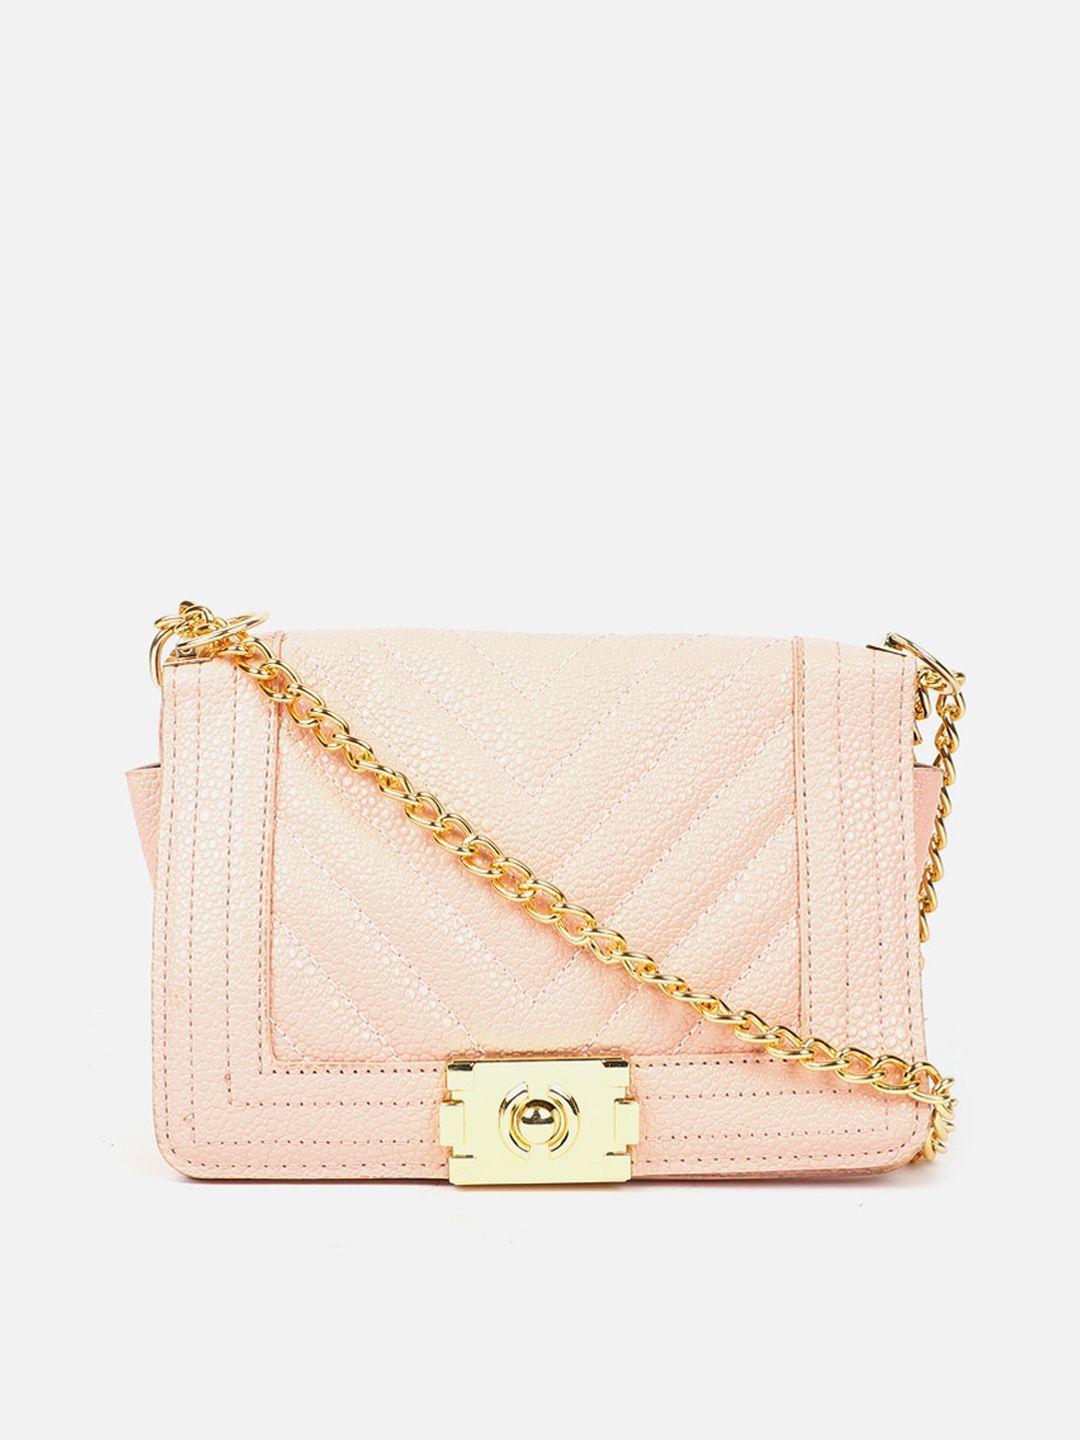 carlton london textured structured sling bag with quilted